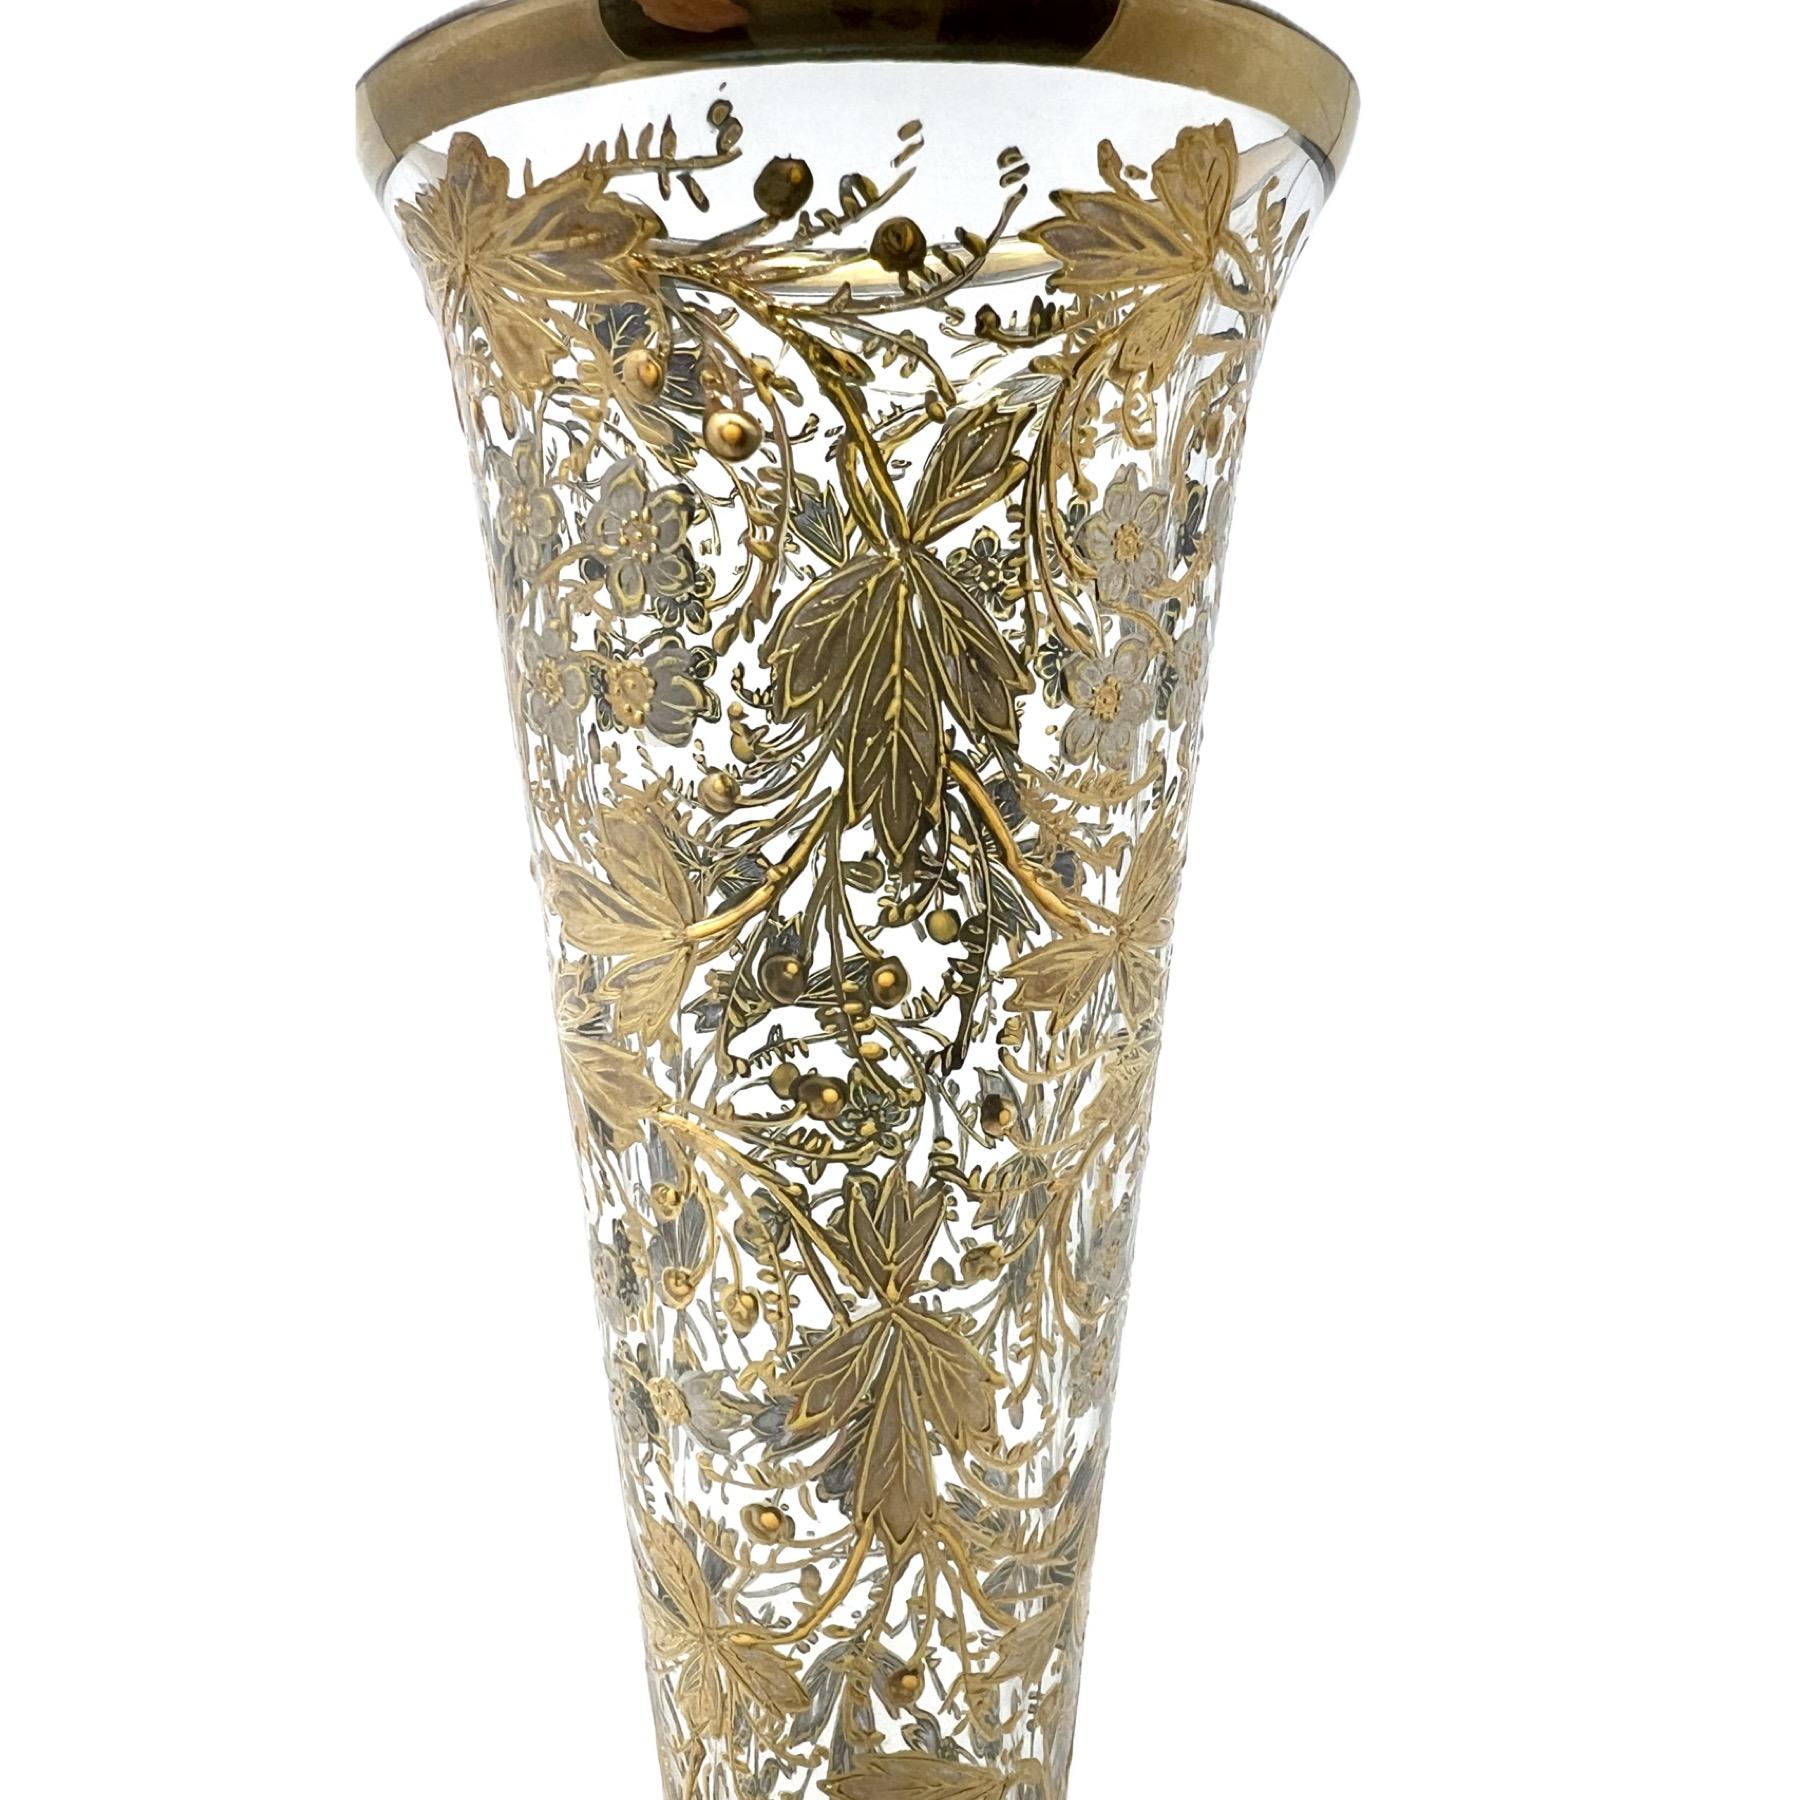 Antique 19th Century German Moser Glass Bud Vase with Gold Overlay, Circa 1885. For Sale 1